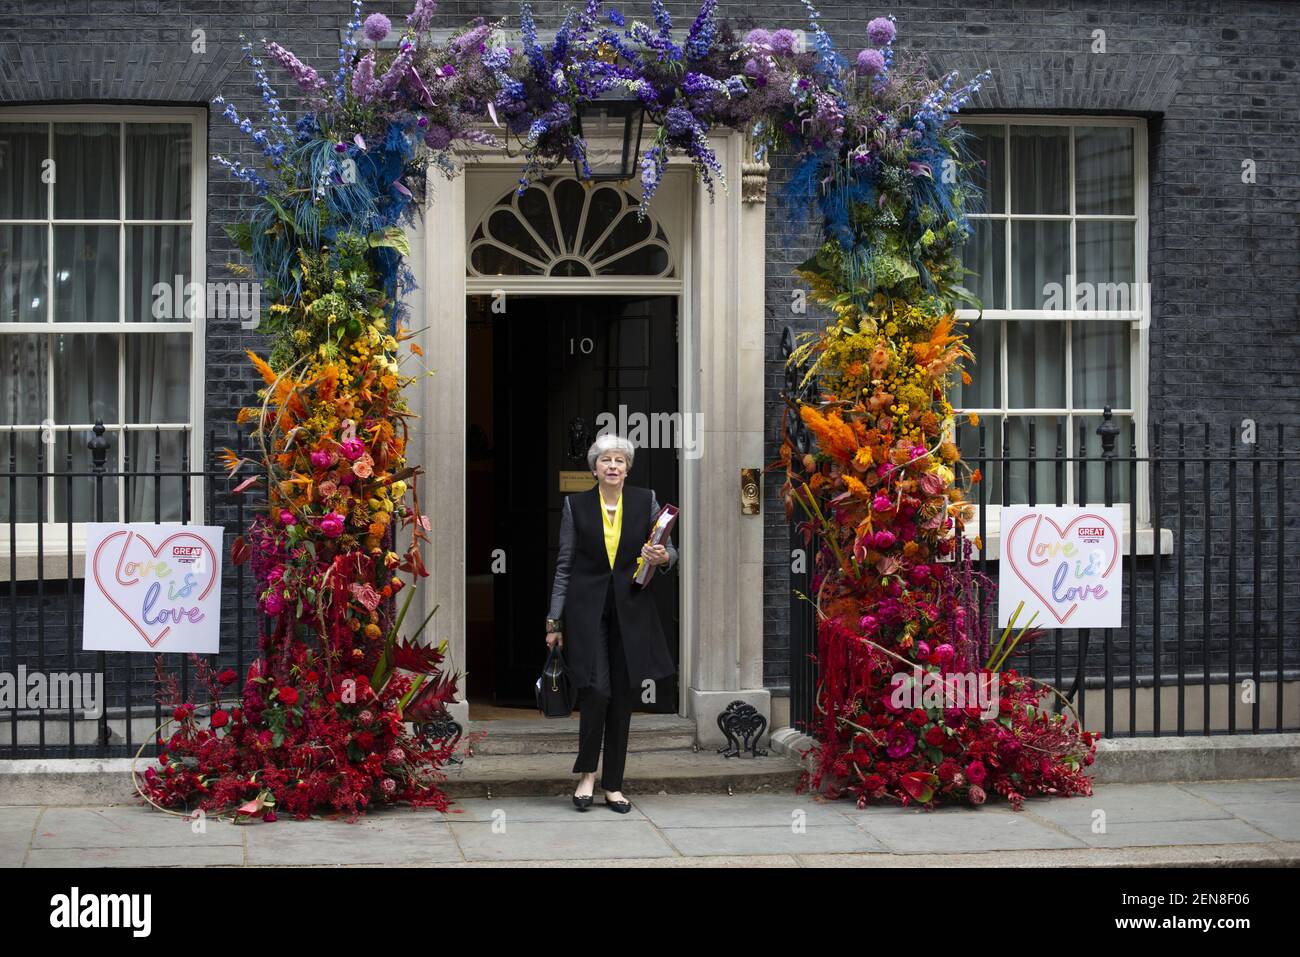 Prime Minister Theresa May departs 10 Downing Street to attend Prime Ministers questions in the House of Commons in Central London, UK on June 3, 2019. The front door of No 10 Downing Street is decorated in rainbow coloured fresh flowers to celebrate the LGBTI community in Pride month. (Photo by Claire Doherty/Sipa USA) Stock Photo